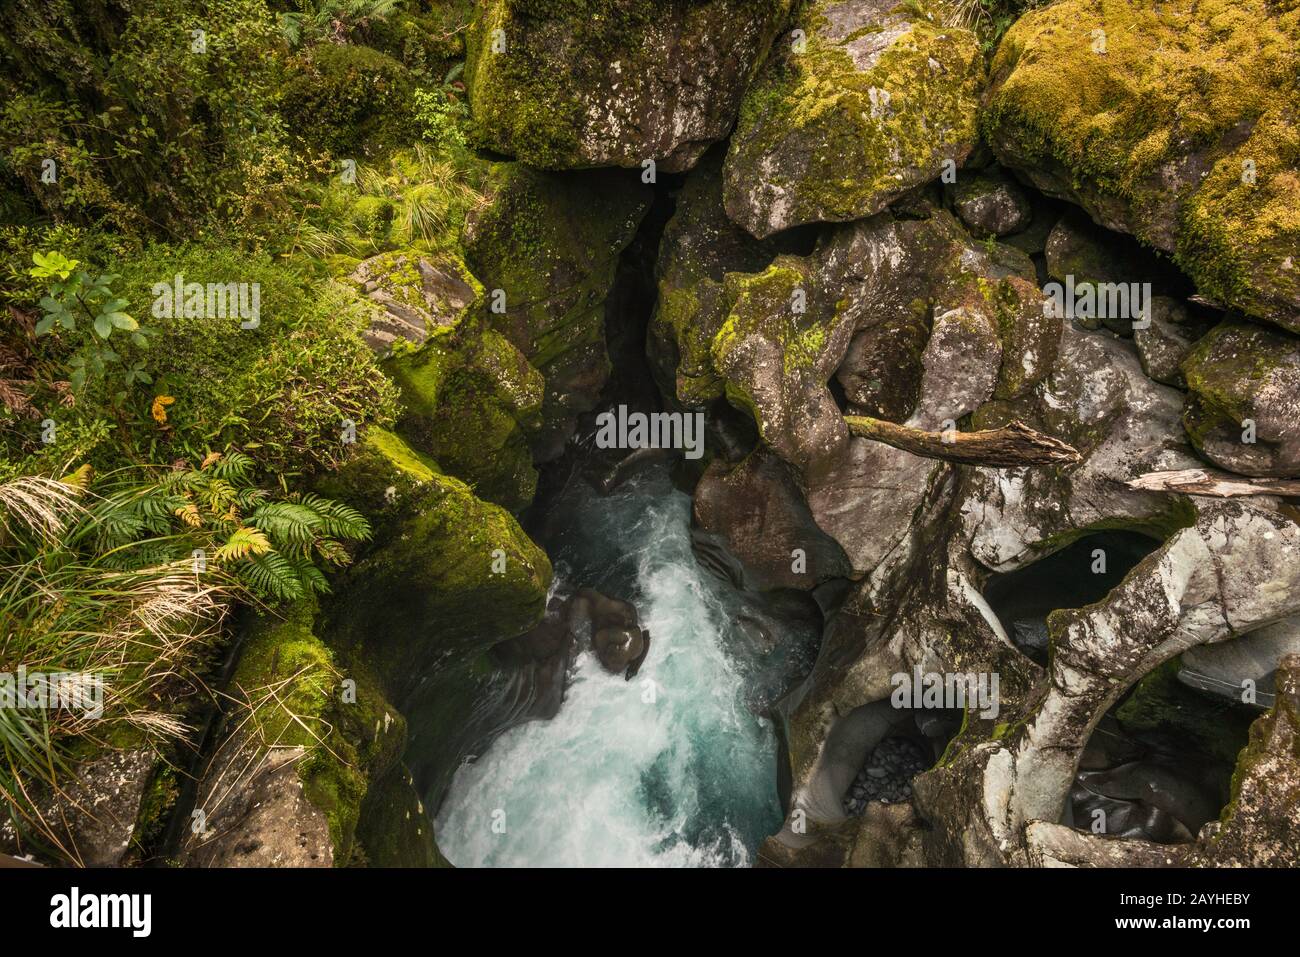 Potholes ground out in rocks by Cleddau River at The Chasm, Fiordland National Park, near Milford Sound, Southland Region, South Island, New Zealand Stock Photo